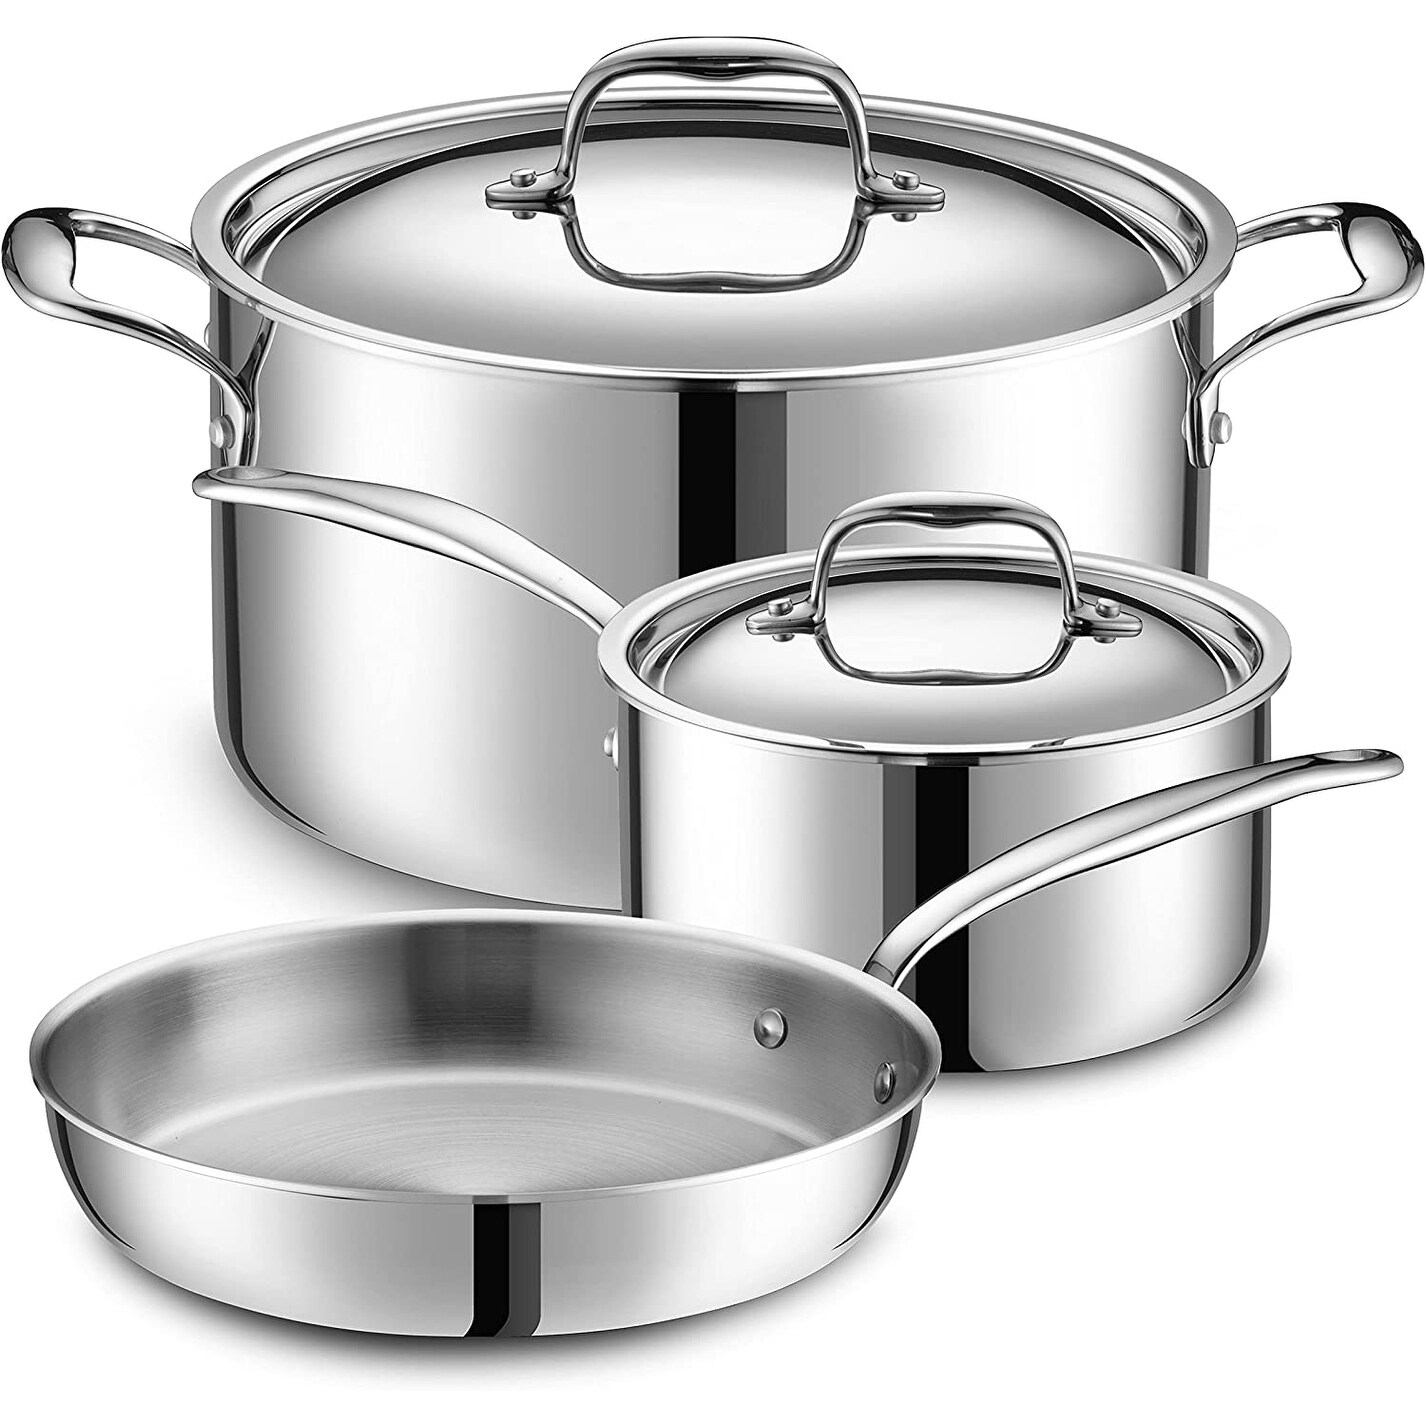 5 Ply 5 pc Small Starter Set Stainless Steel Pots & Pans for Home